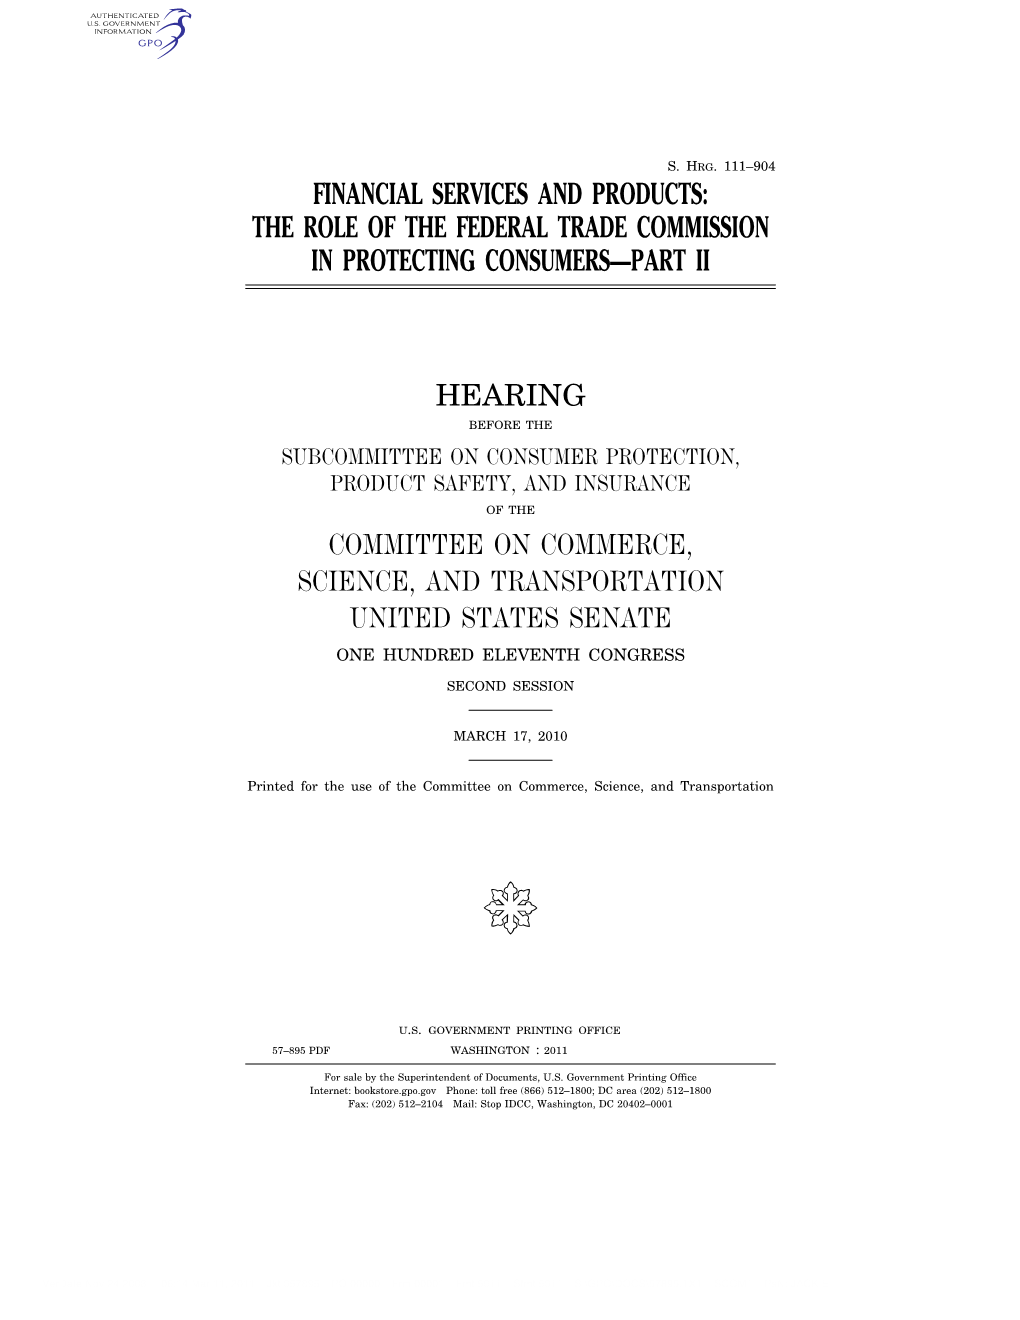 Financial Services and Products: the Role of the Federal Trade Commission in Protecting Consumers—Part Ii